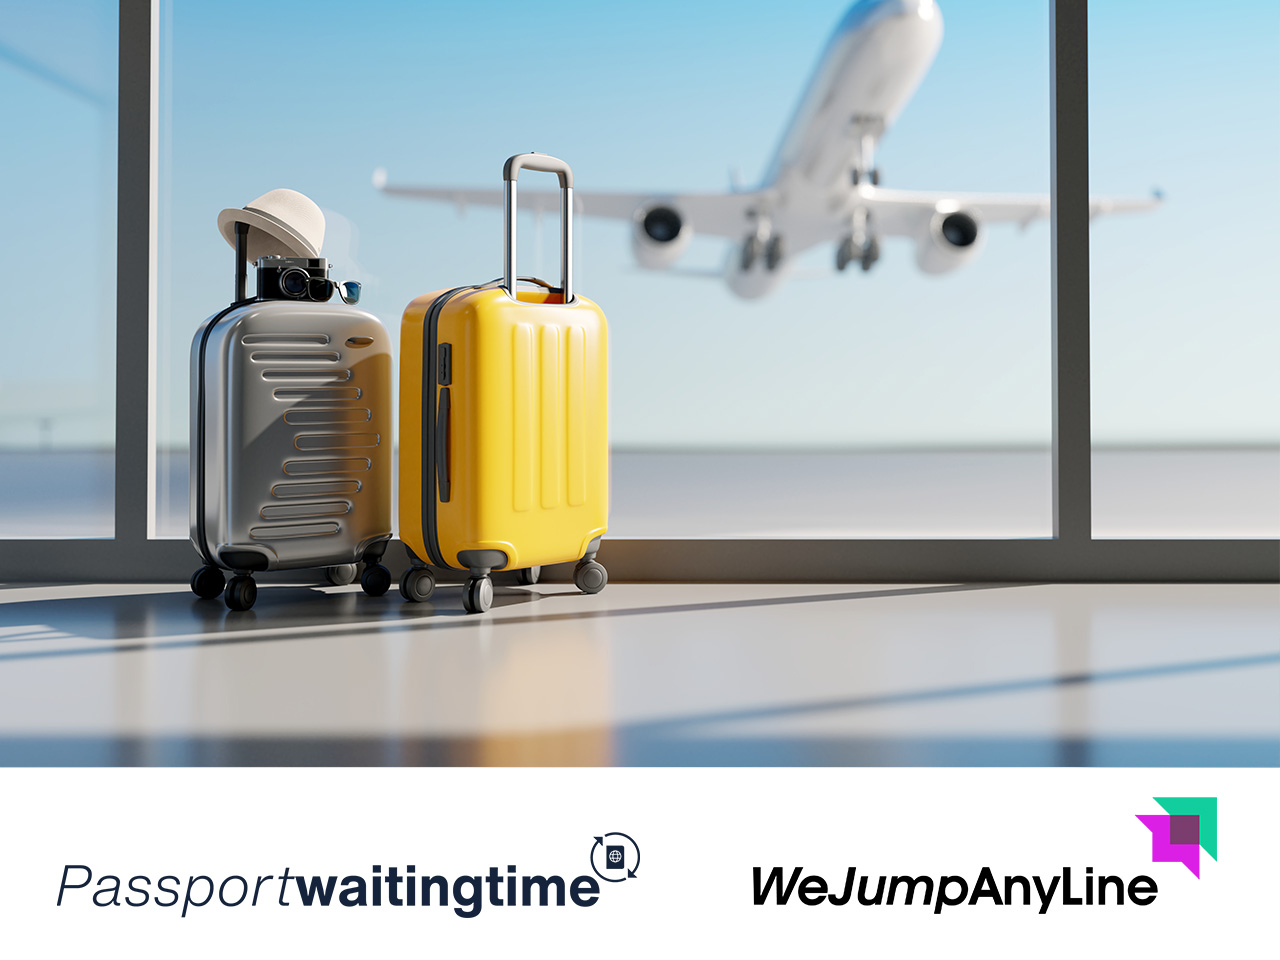 Passport Waiting Time acquires We Jump Any Line to offer customers ‘more seamless travel experience’